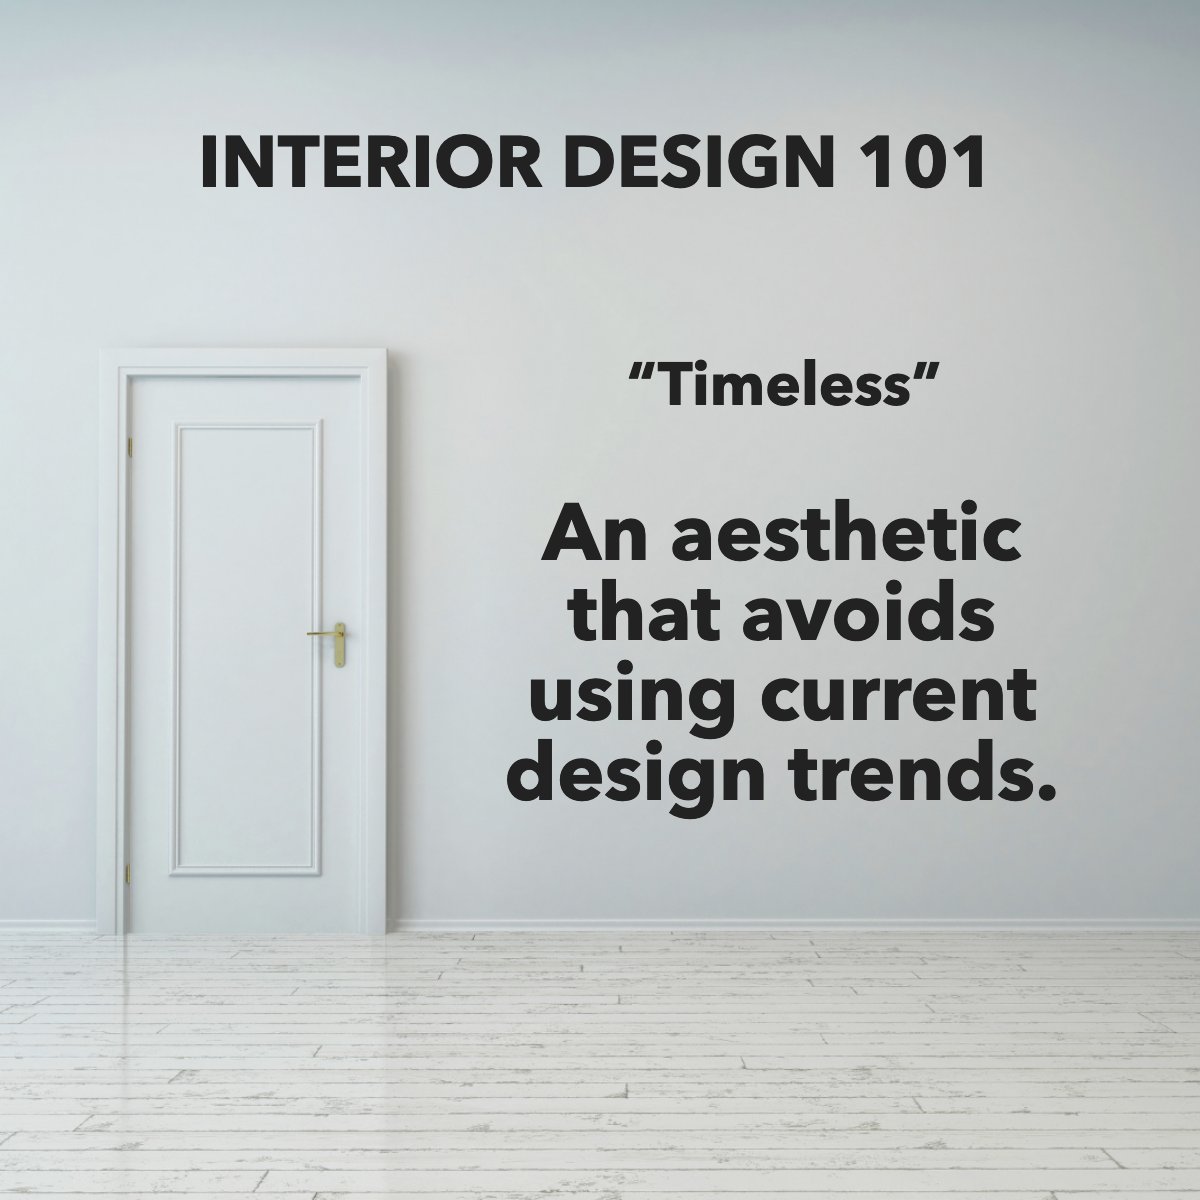 🔝 The longevity of the pieces or aesthetic you choose for your home is a game-changer. 

Have you ever thought about 'Timeless' as an aesthetic? 🤔

#interiordesigntips    #interiordesigngoals    #interiordesigninspo    #moderninteriordesign